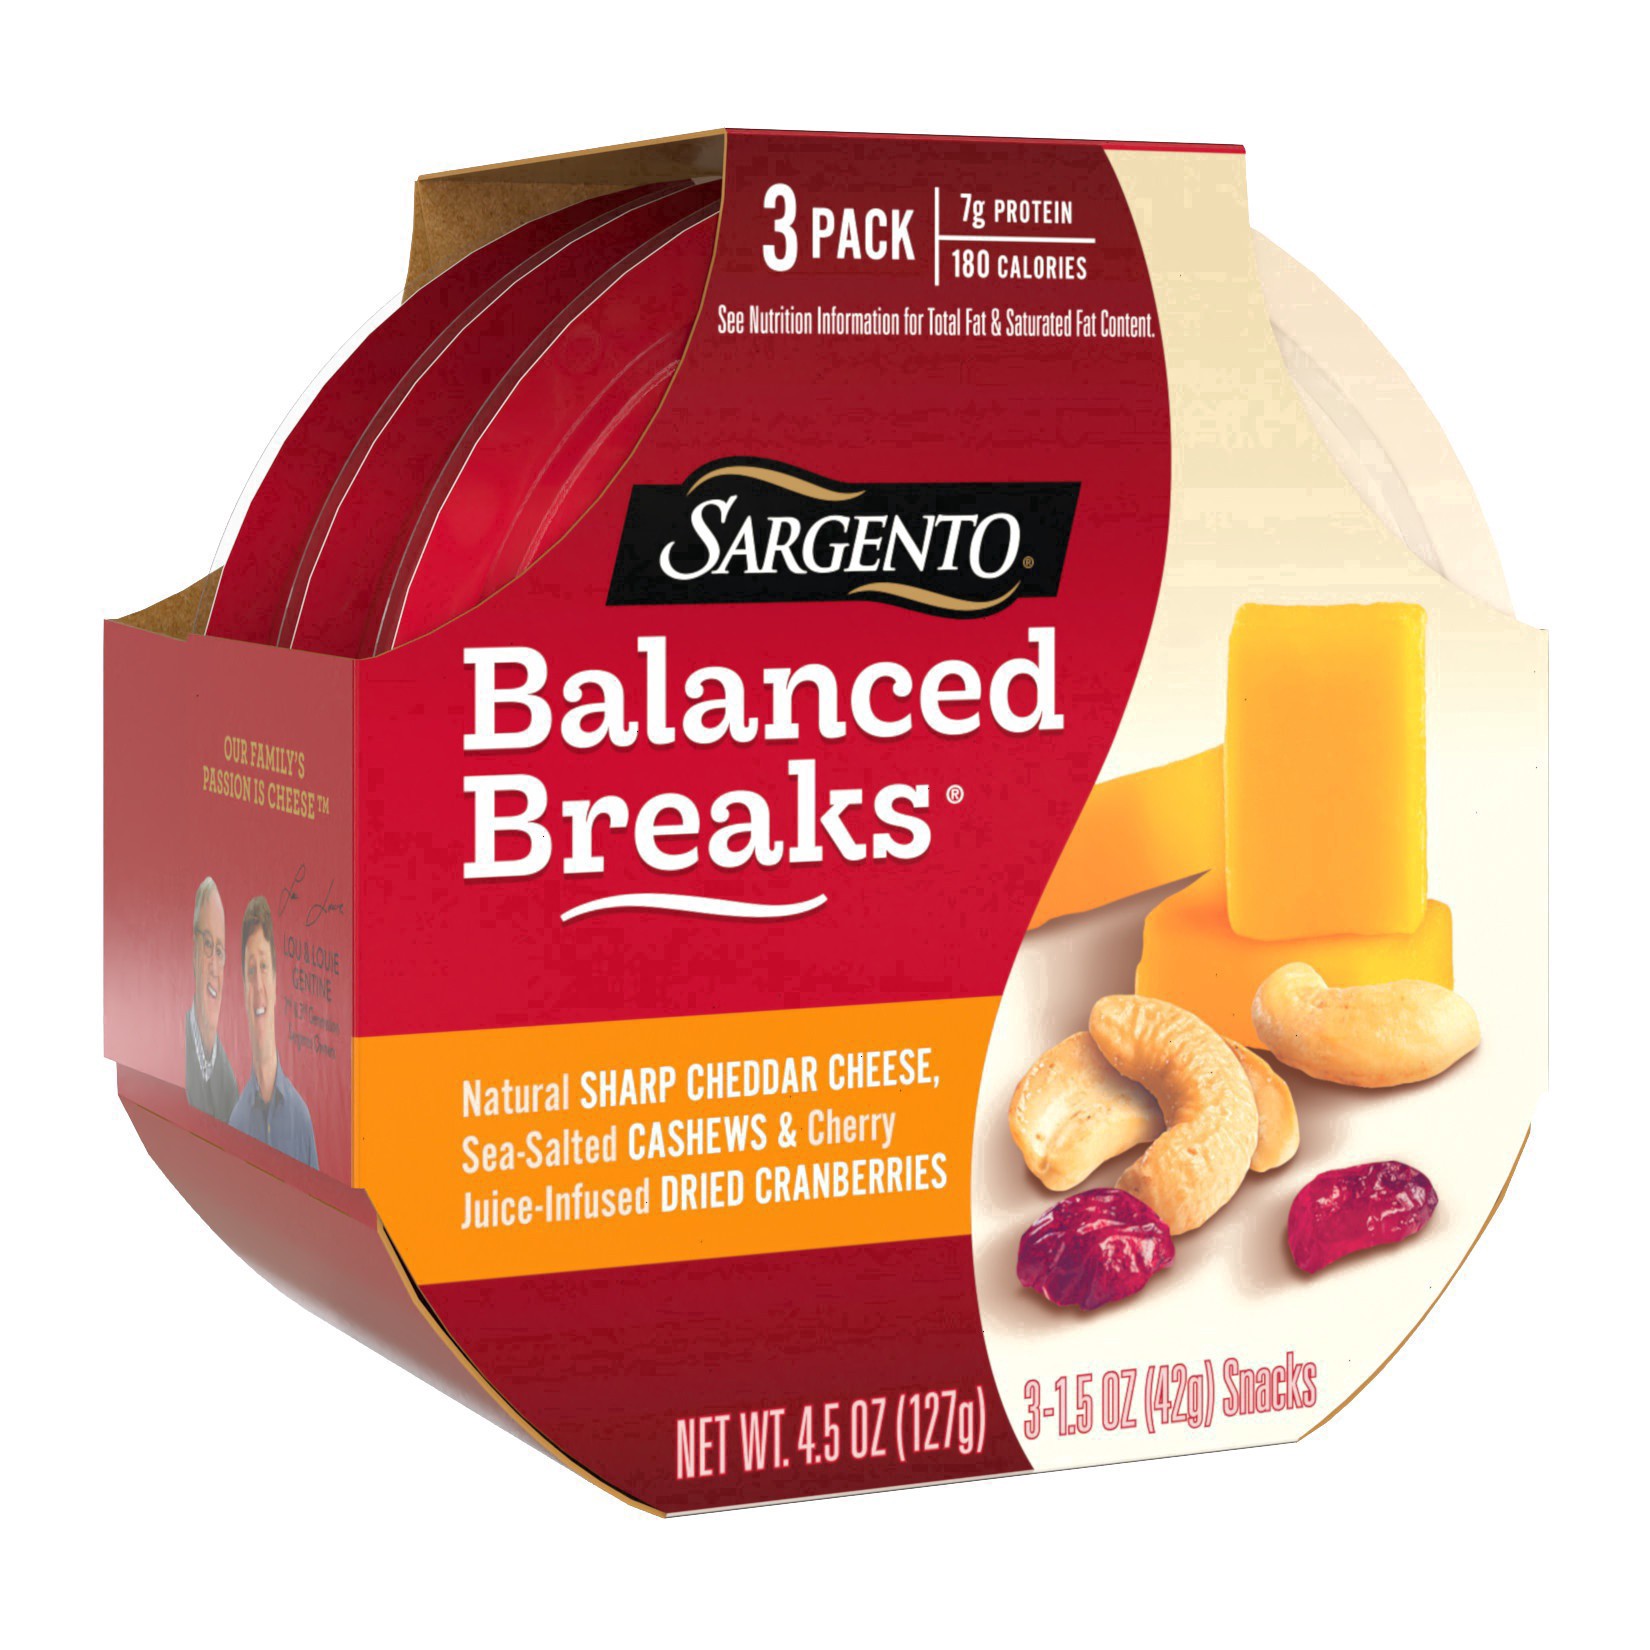 slide 32 of 34, Sargento Balanced Breaks Natural Sharp Cheddar Cheese, Sea-Salted Cashews and Cherry Juice-Infused Dried Cranberries, 3-Pack, 3 ct